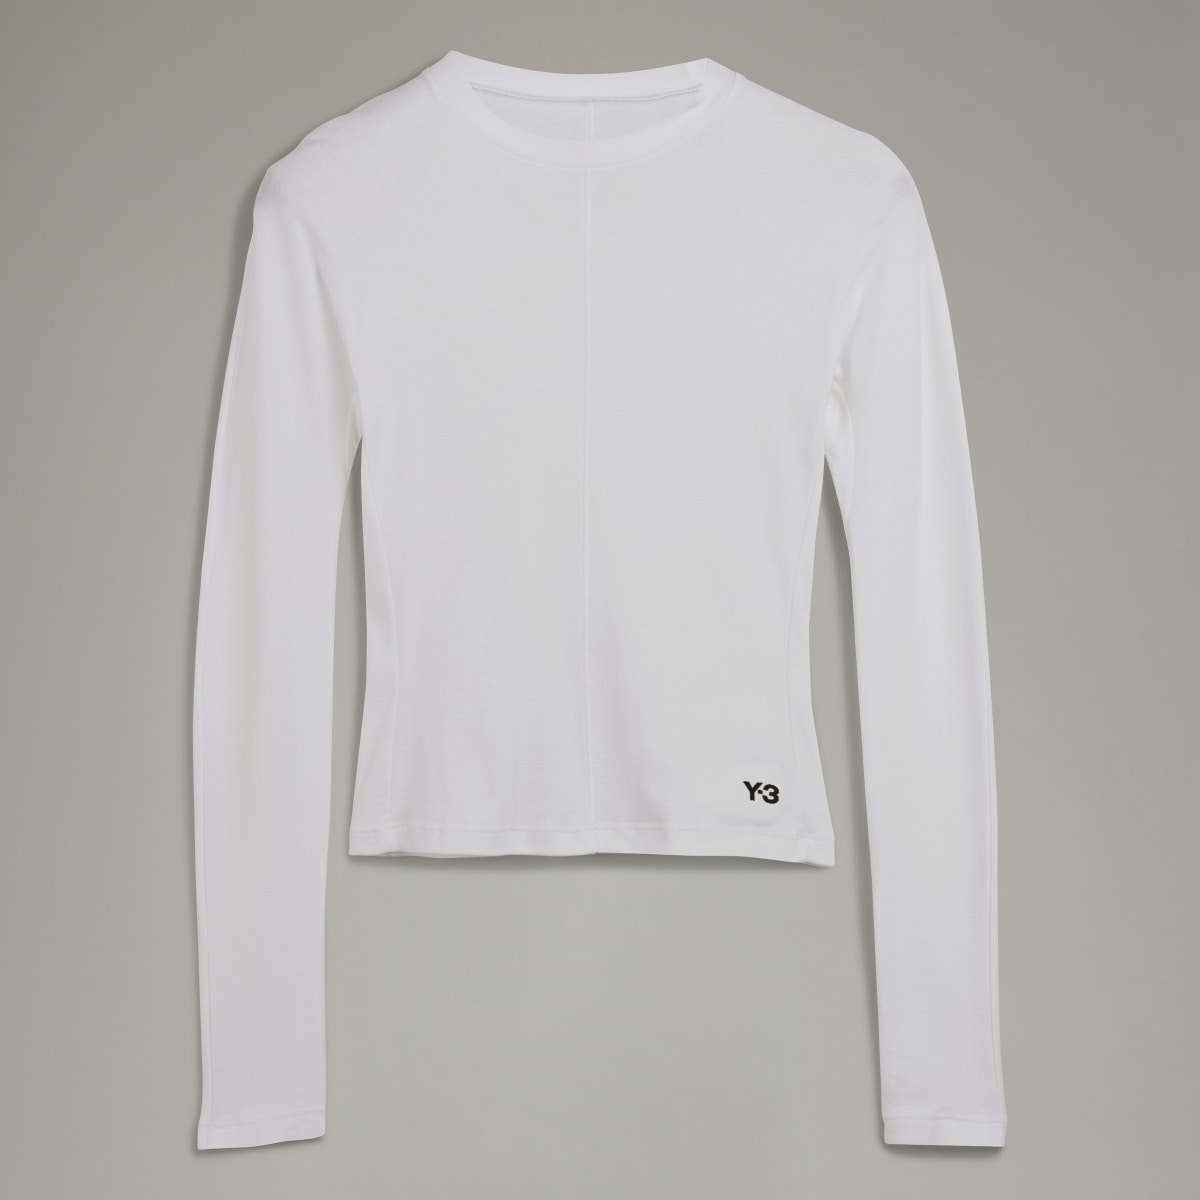 Adidas Y-3 Fitted Long Sleeve Tee. 5